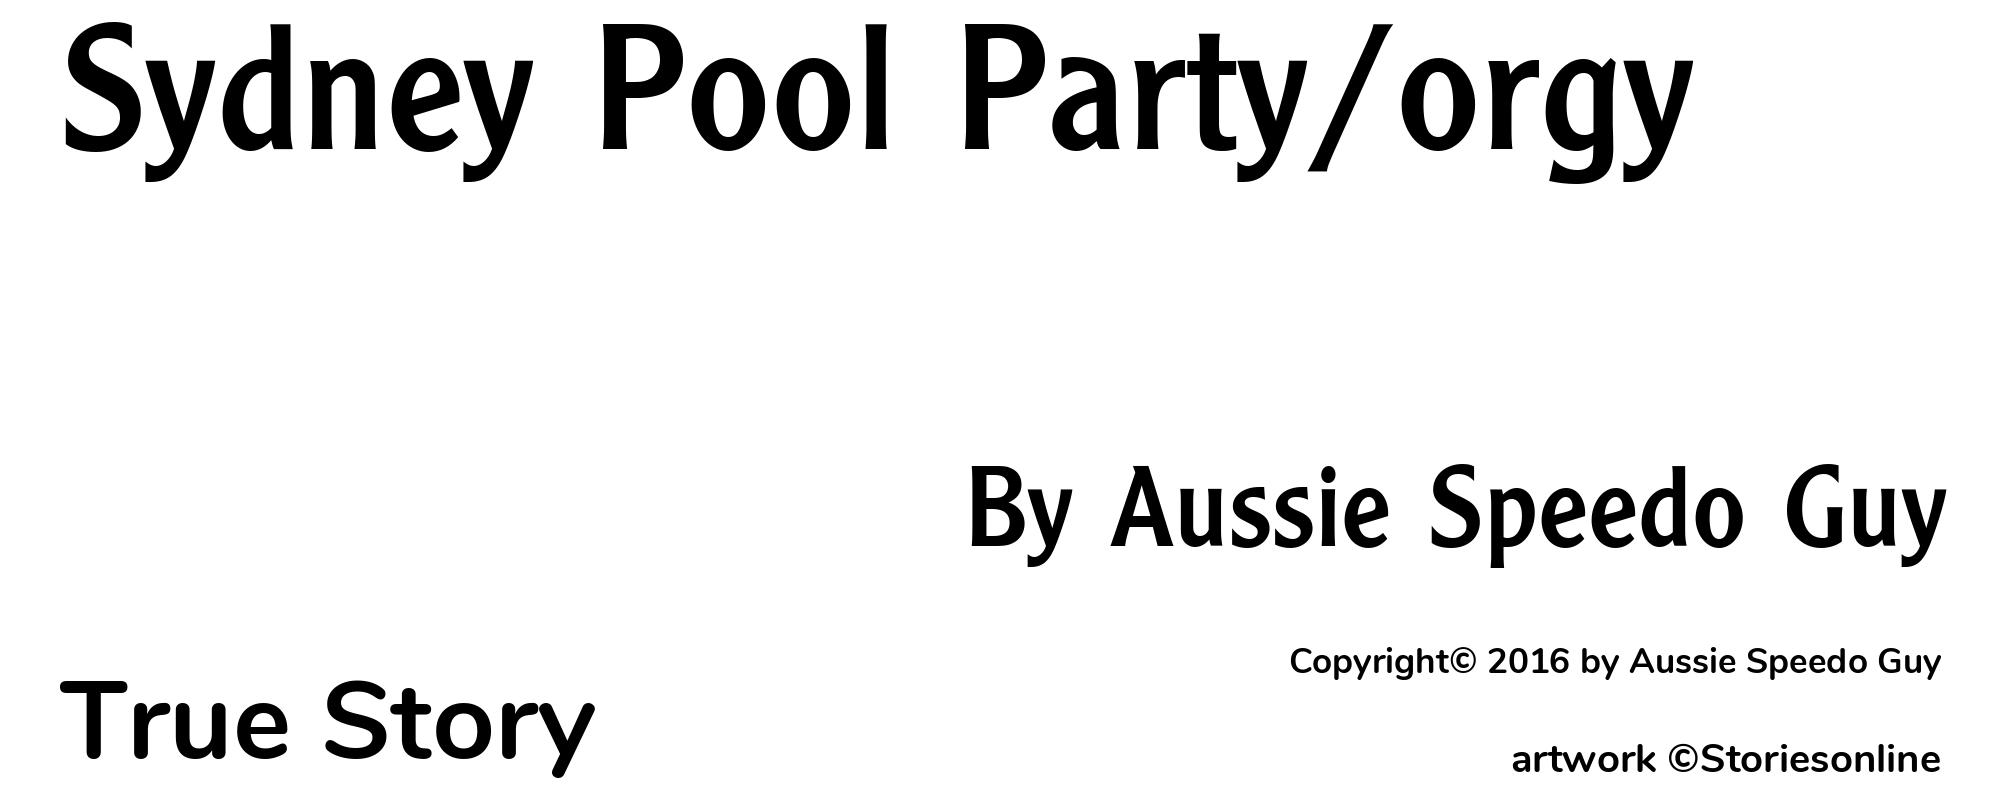 Sydney Pool Party/orgy - Cover